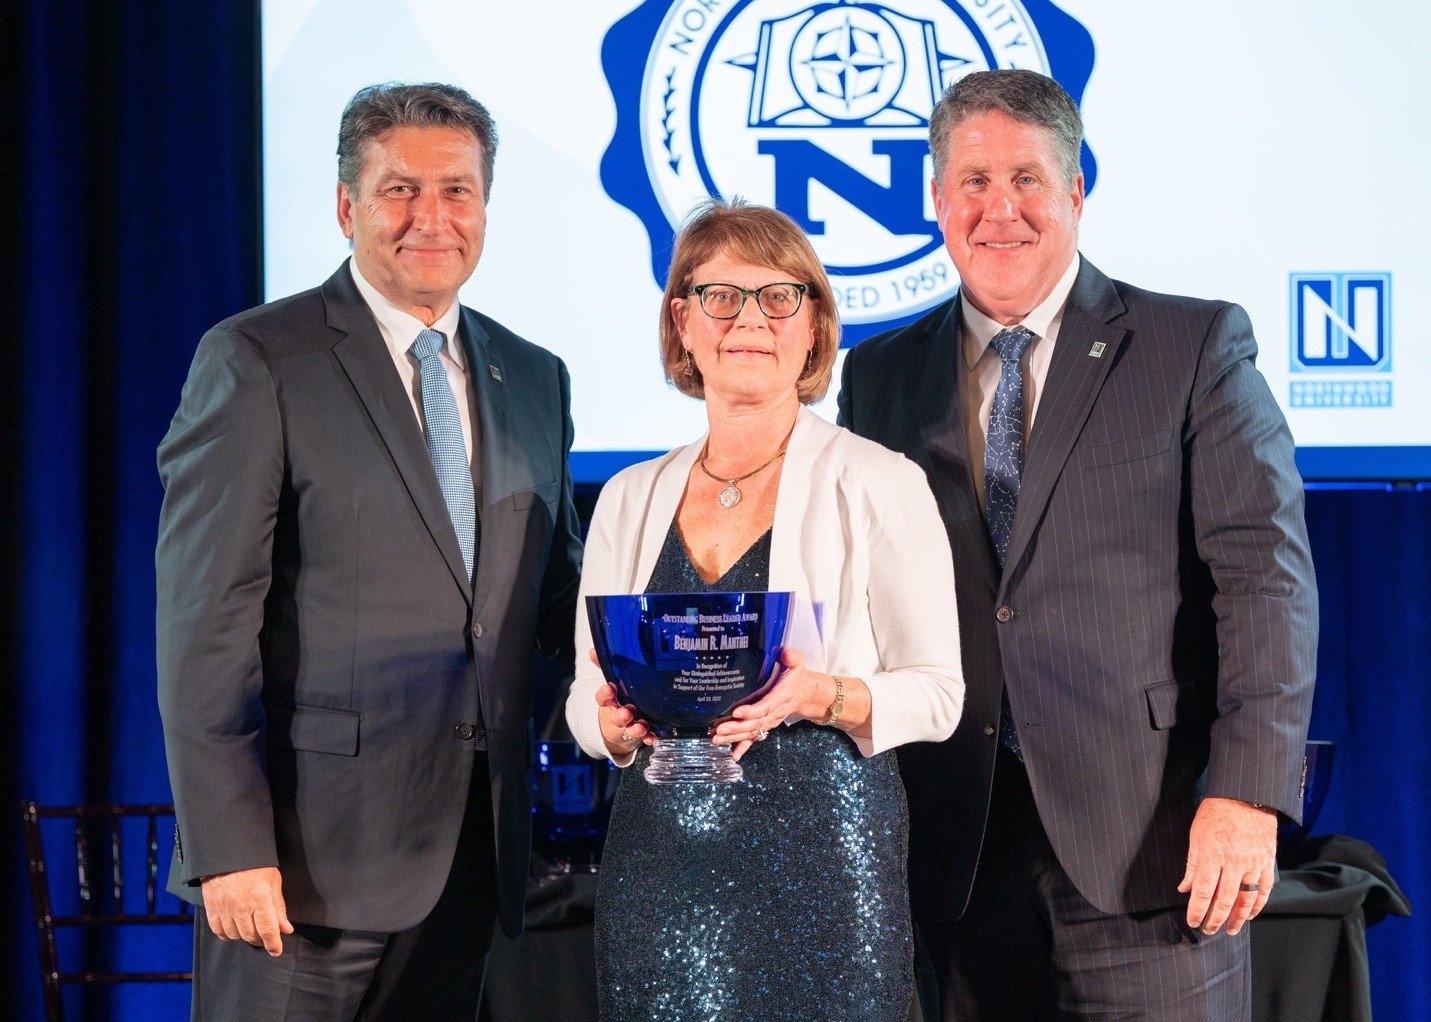  From left, Northwood University Board of Trustees Vice Chair Steve Madincea; Dolores Porte, Sanford Village President and student in the Richard DeVos Graduate School at Northwood University; and President Kent MacDonald. Porte accepted the award on